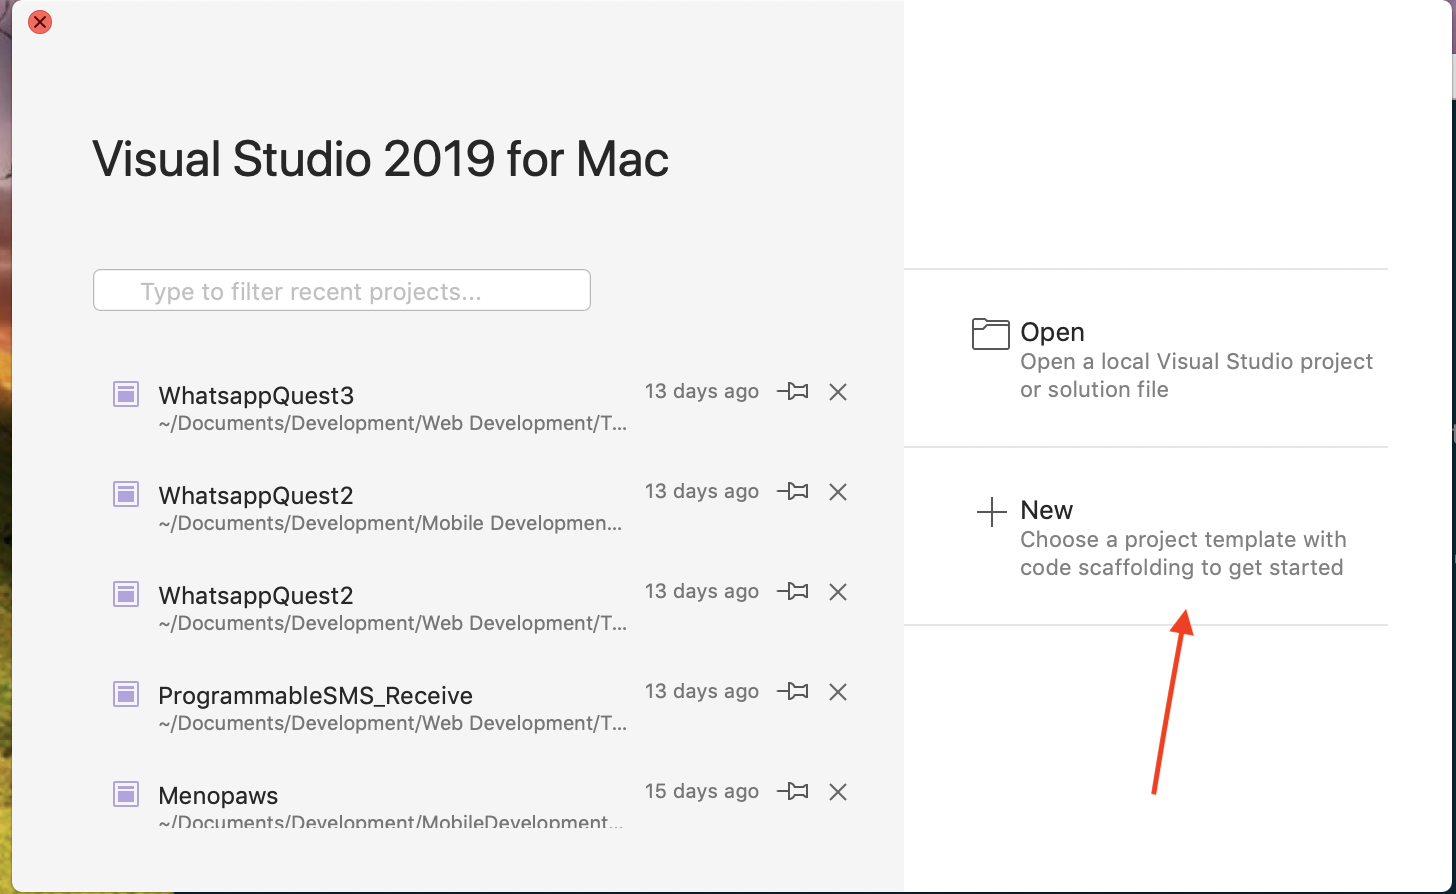 New project under Visual Studio 2019 for Mac